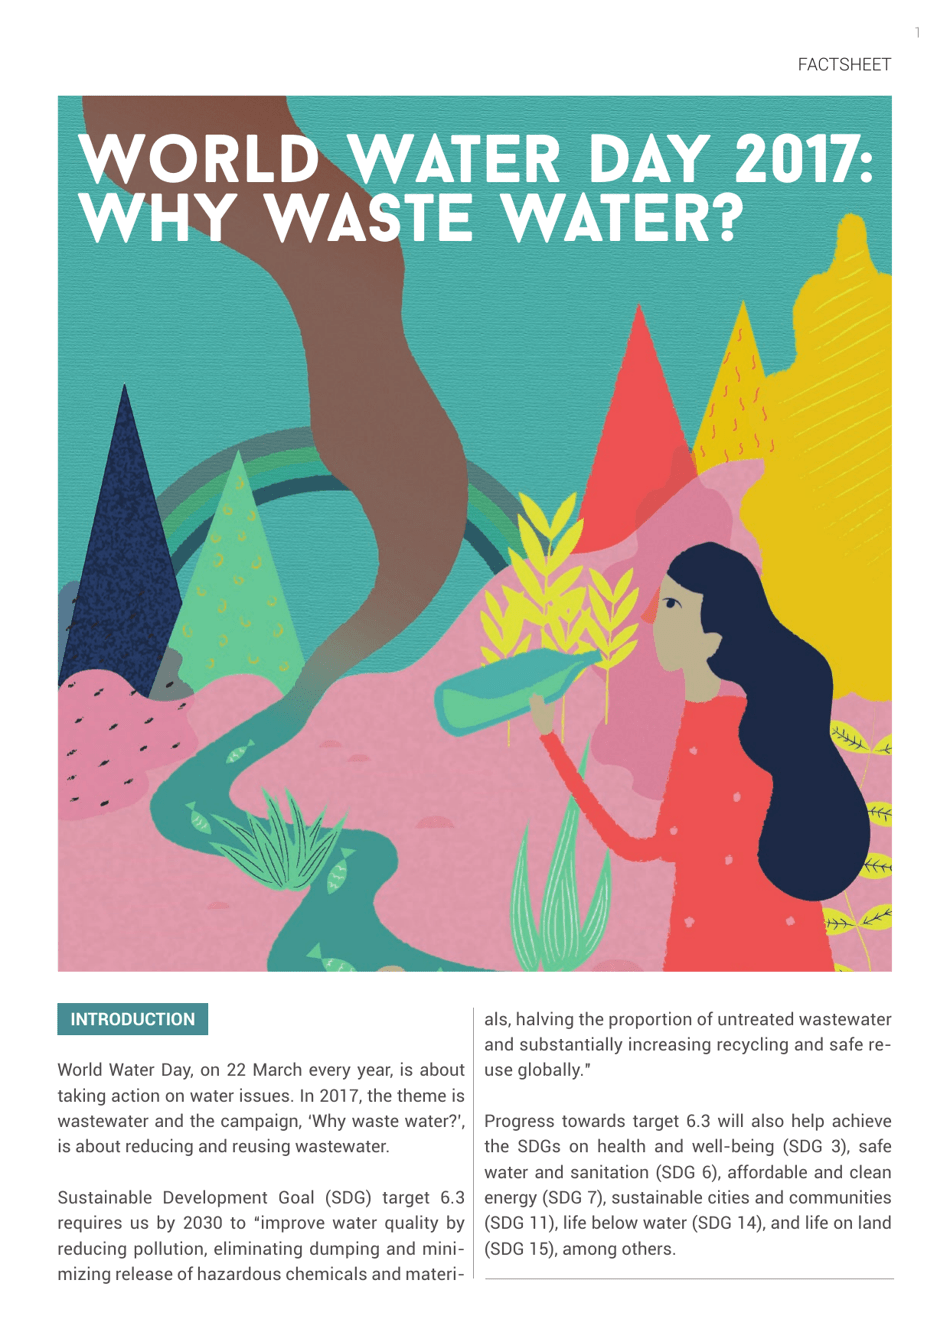 World Water Day 2017 Why Waste Water document illustration